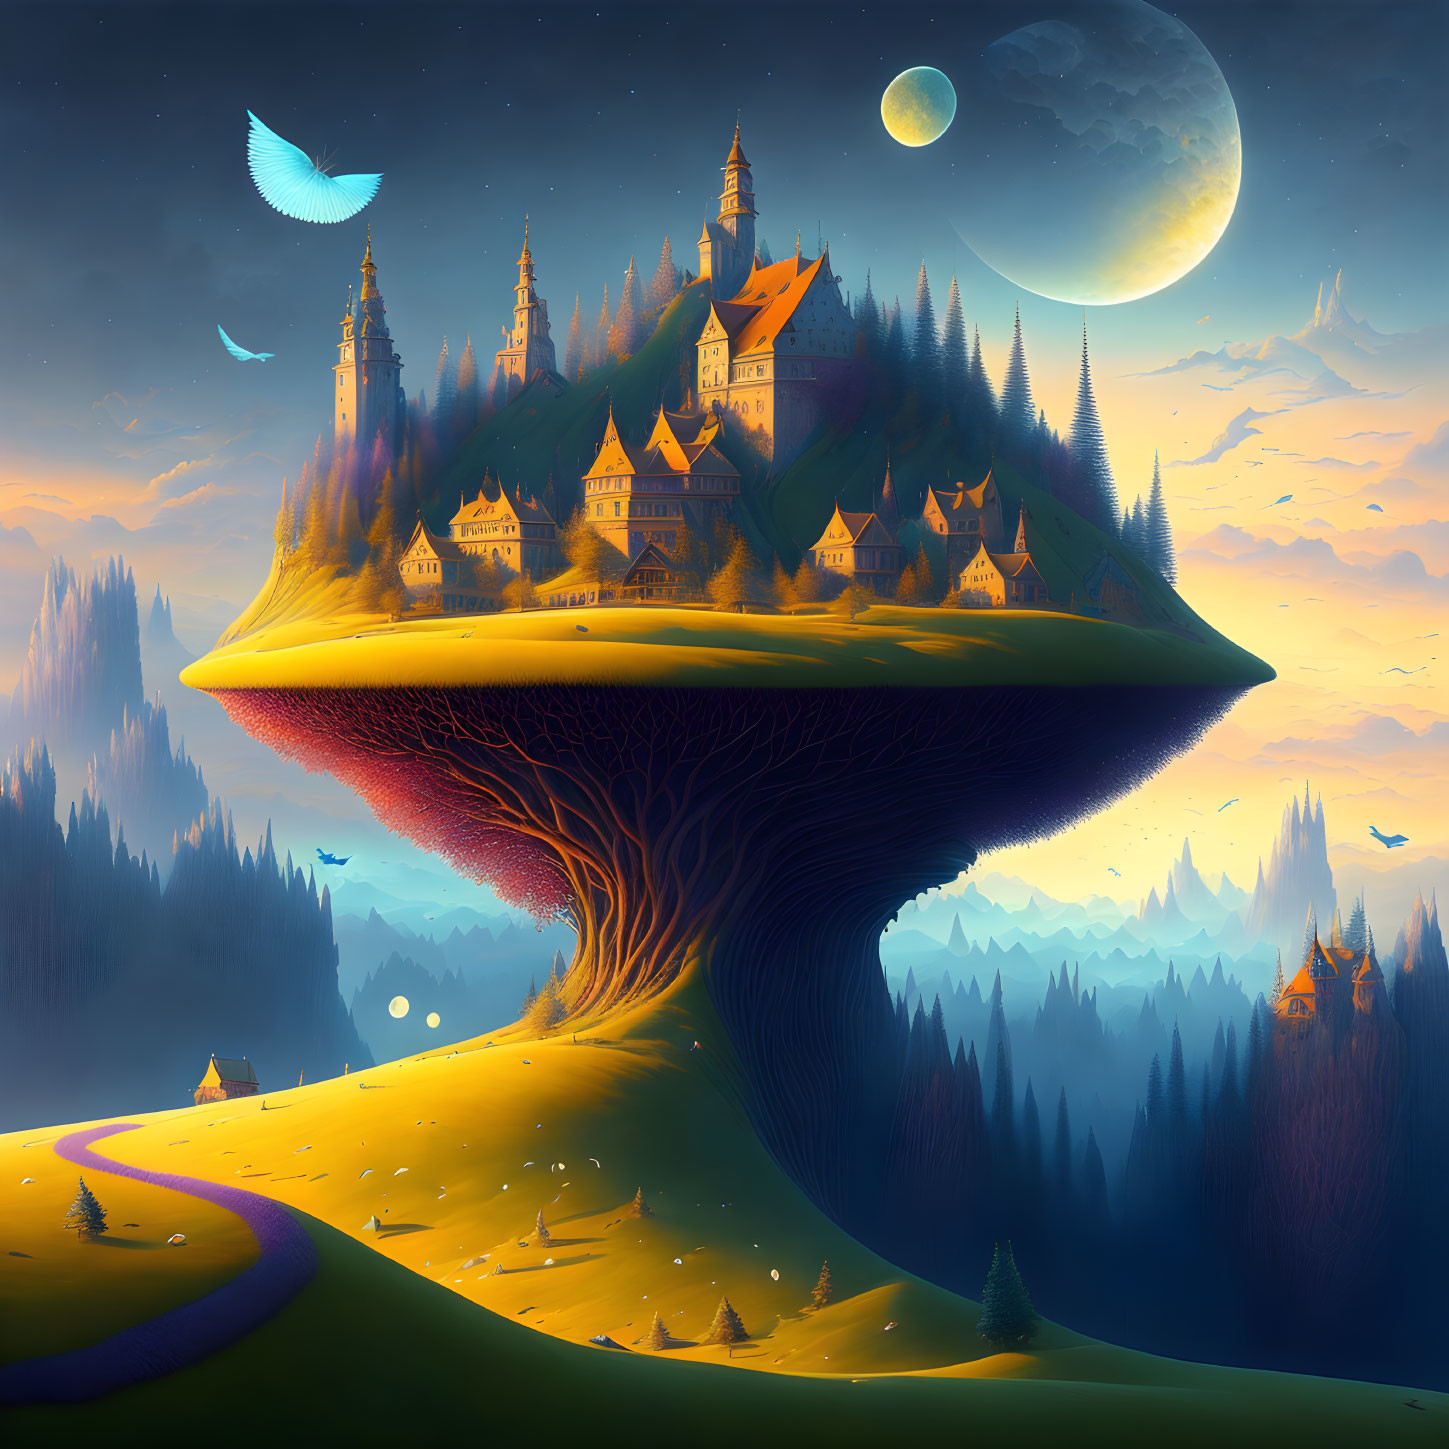 Floating Island with Castle, Houses, Trees, and Moonlit Sky